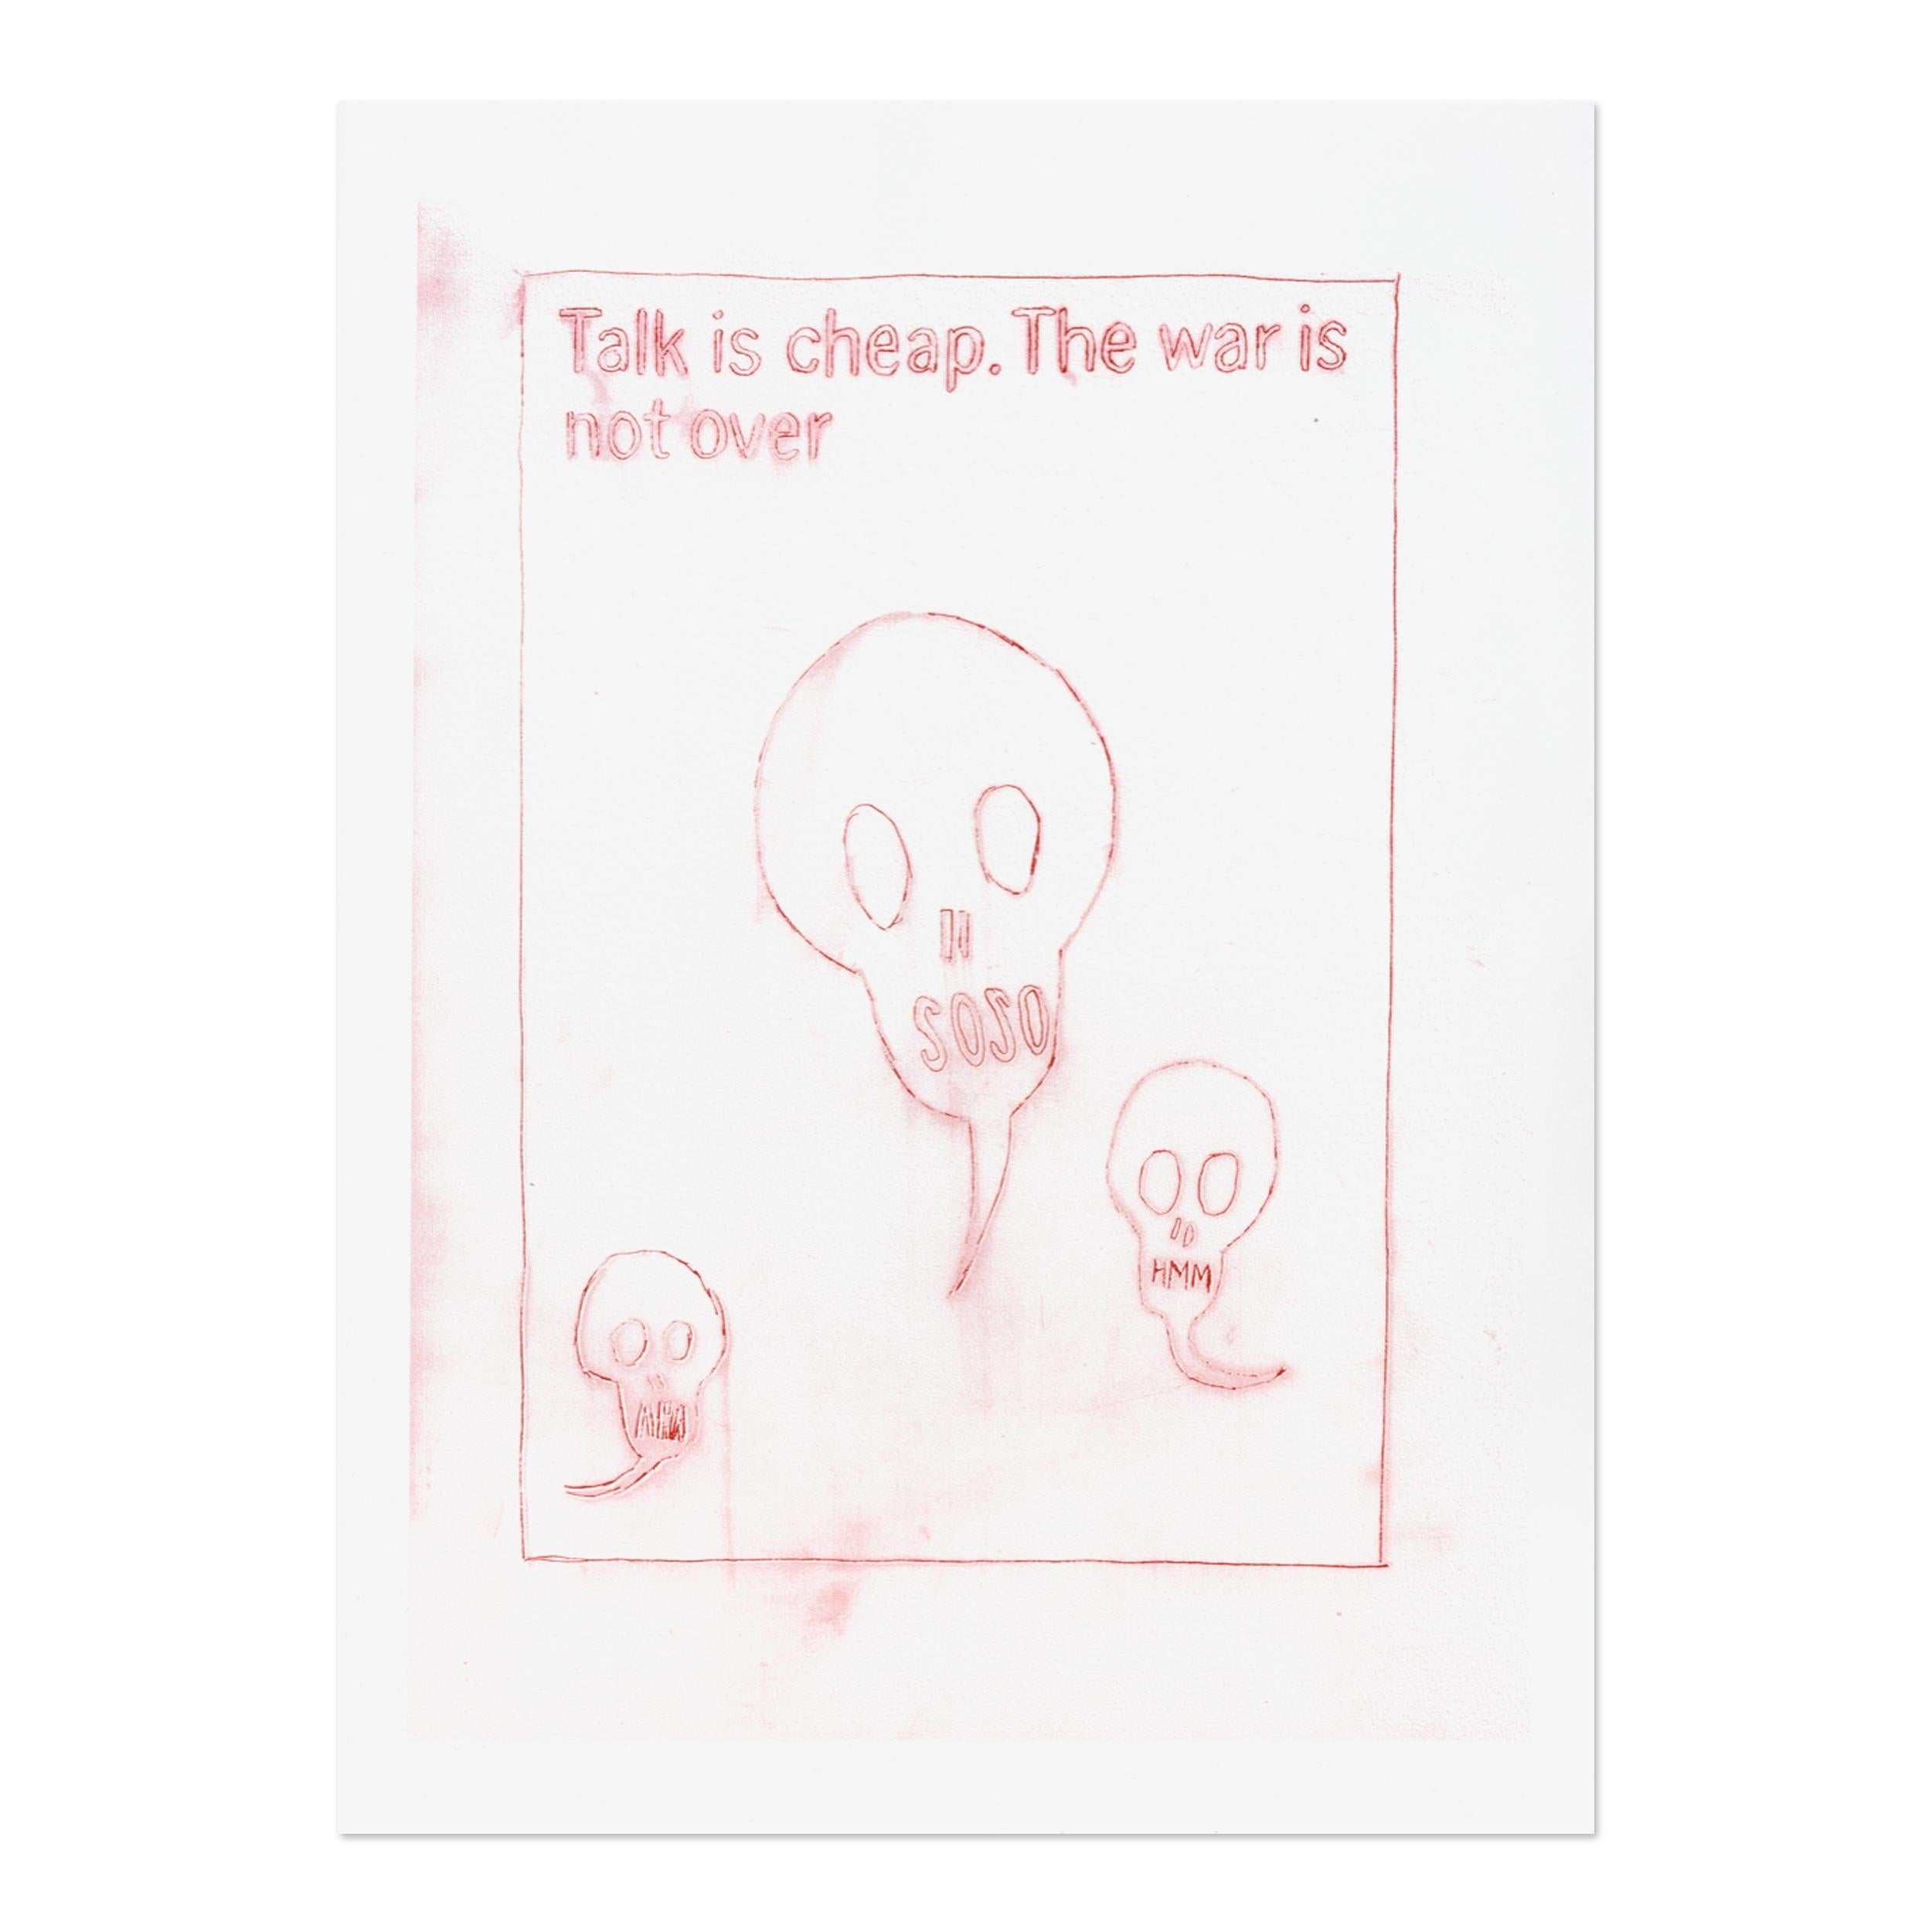 Daniel Richter (German, born 1962)
Untitled (Talk is cheap. The war is not over), 2013
Medium: Screenprint on paper
Dimensions: 129.5 x 94 cm
Edition of 4: Hand-signed and numbered
Condition: Mint